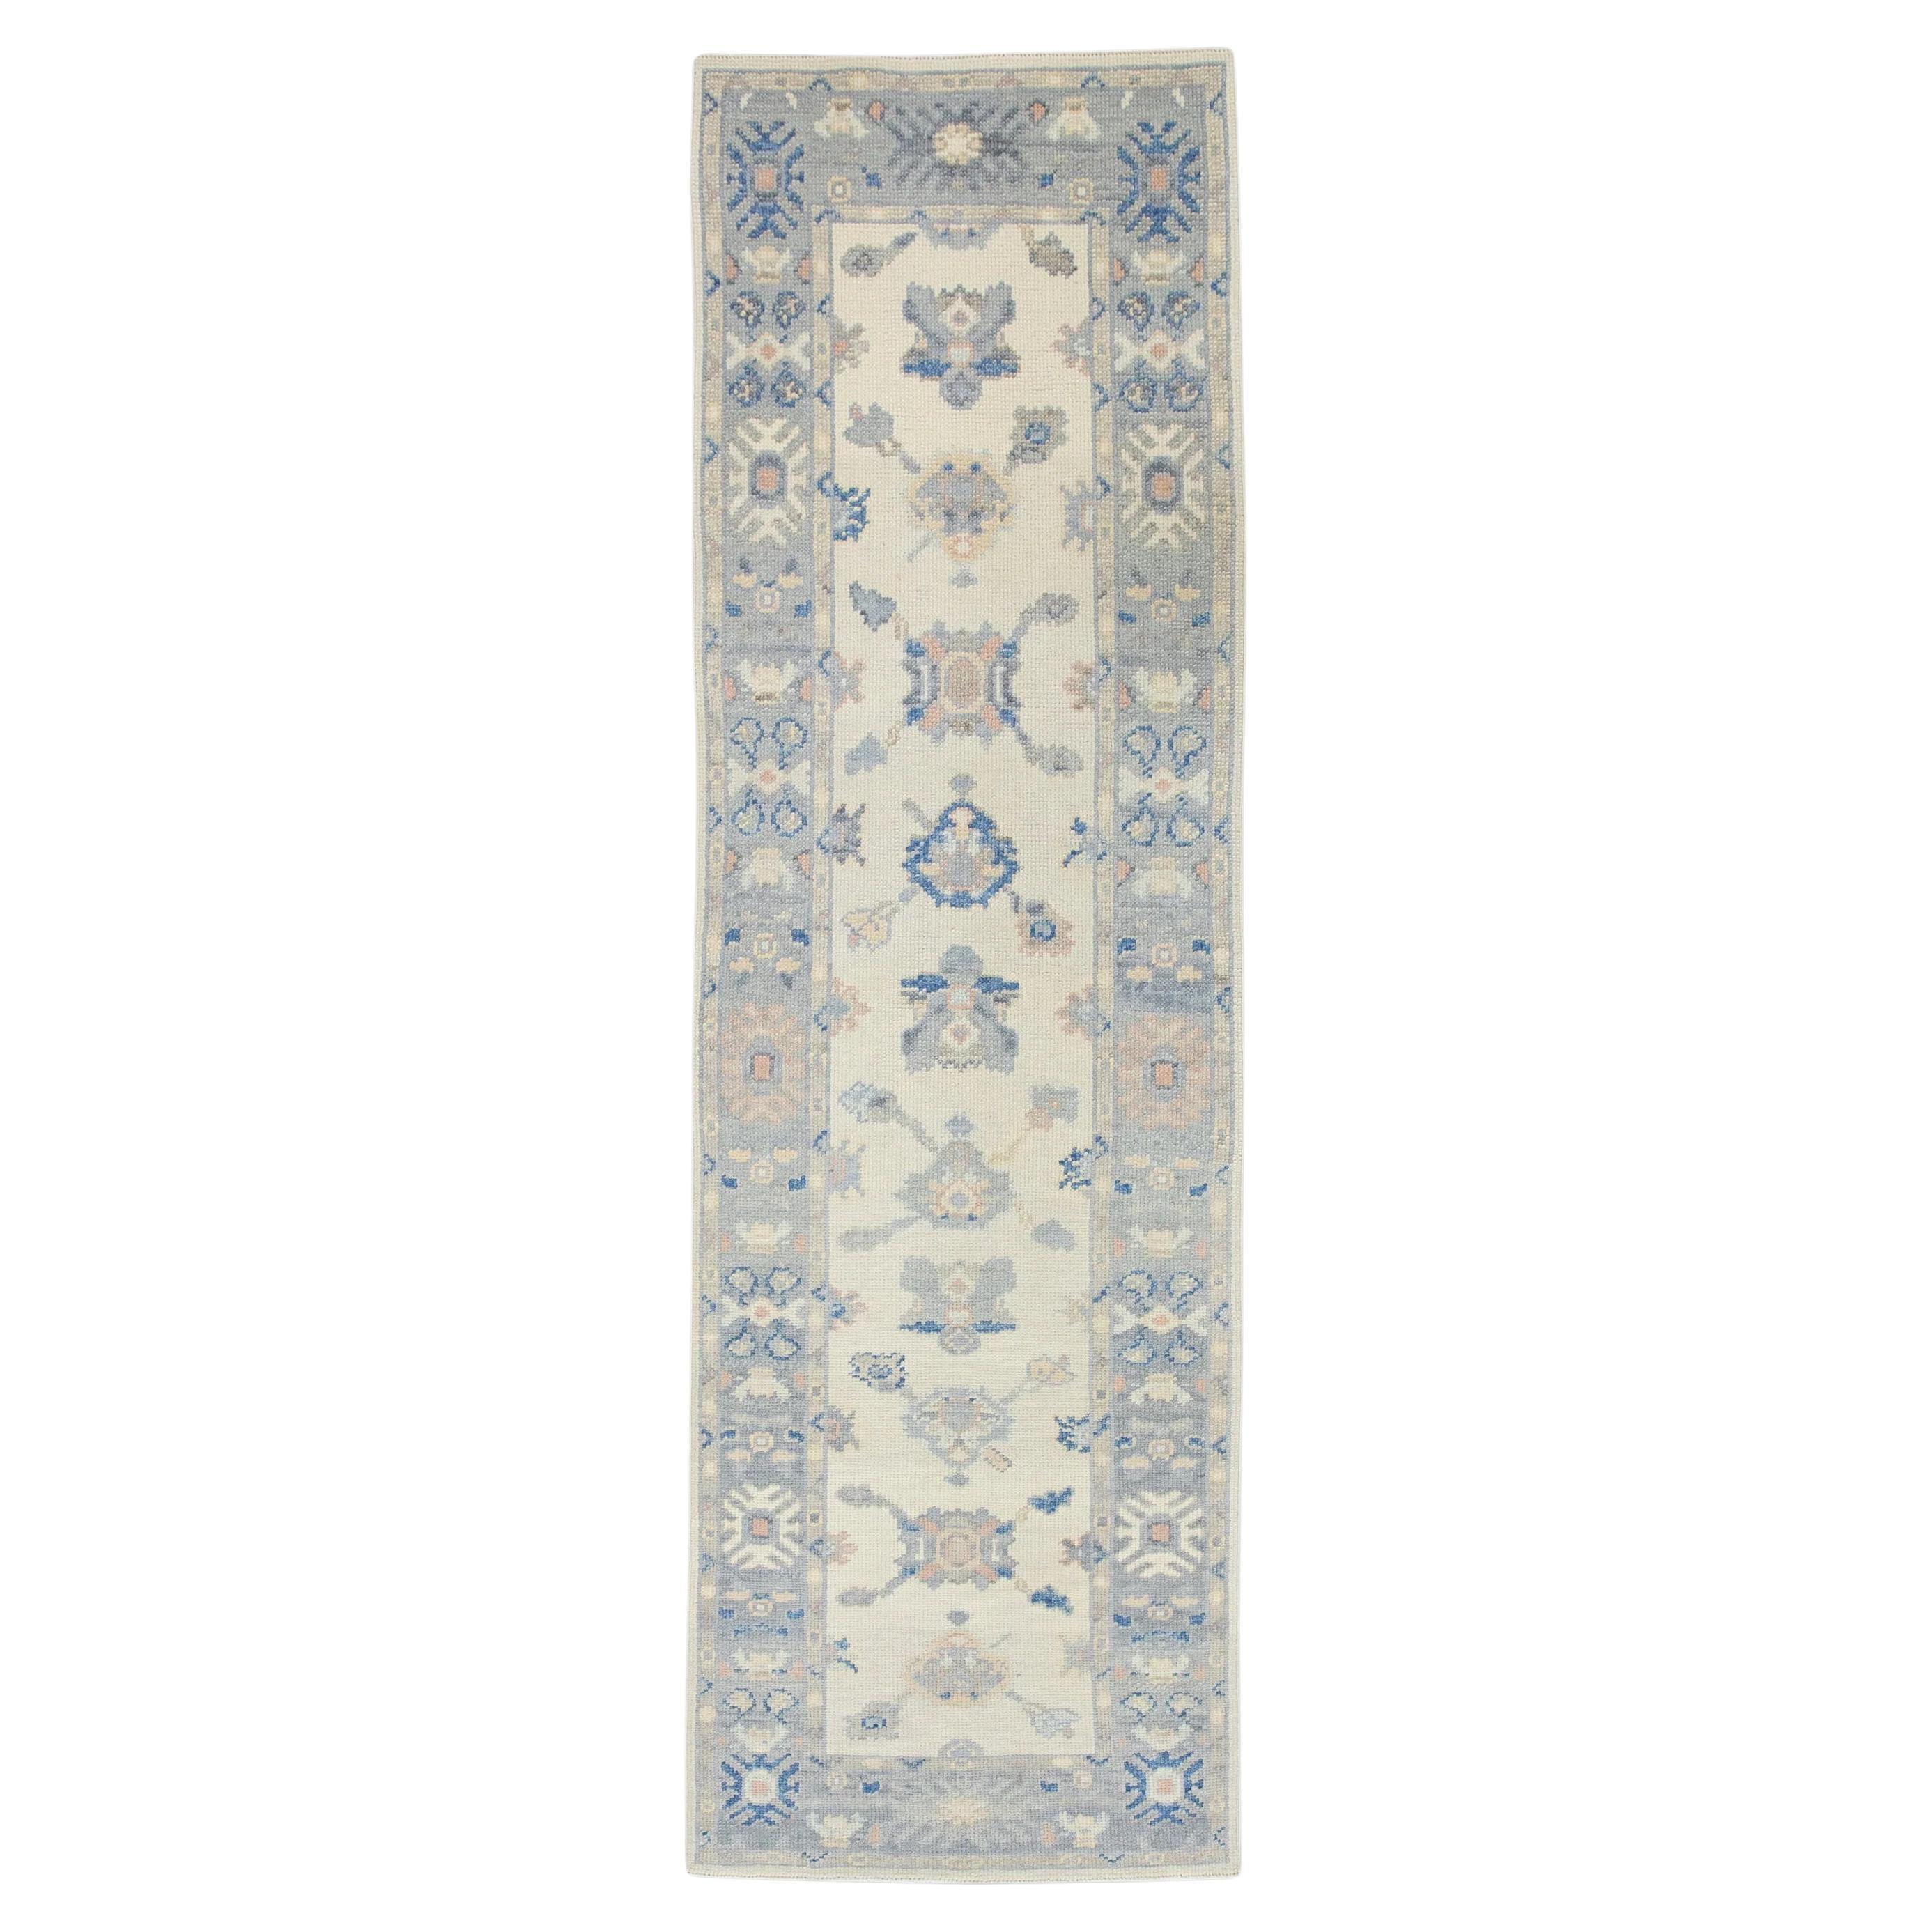 Cream Handwoven Wool Turkish Oushak Rug in Blue Floral Pattern 2'6" x 8'4" For Sale